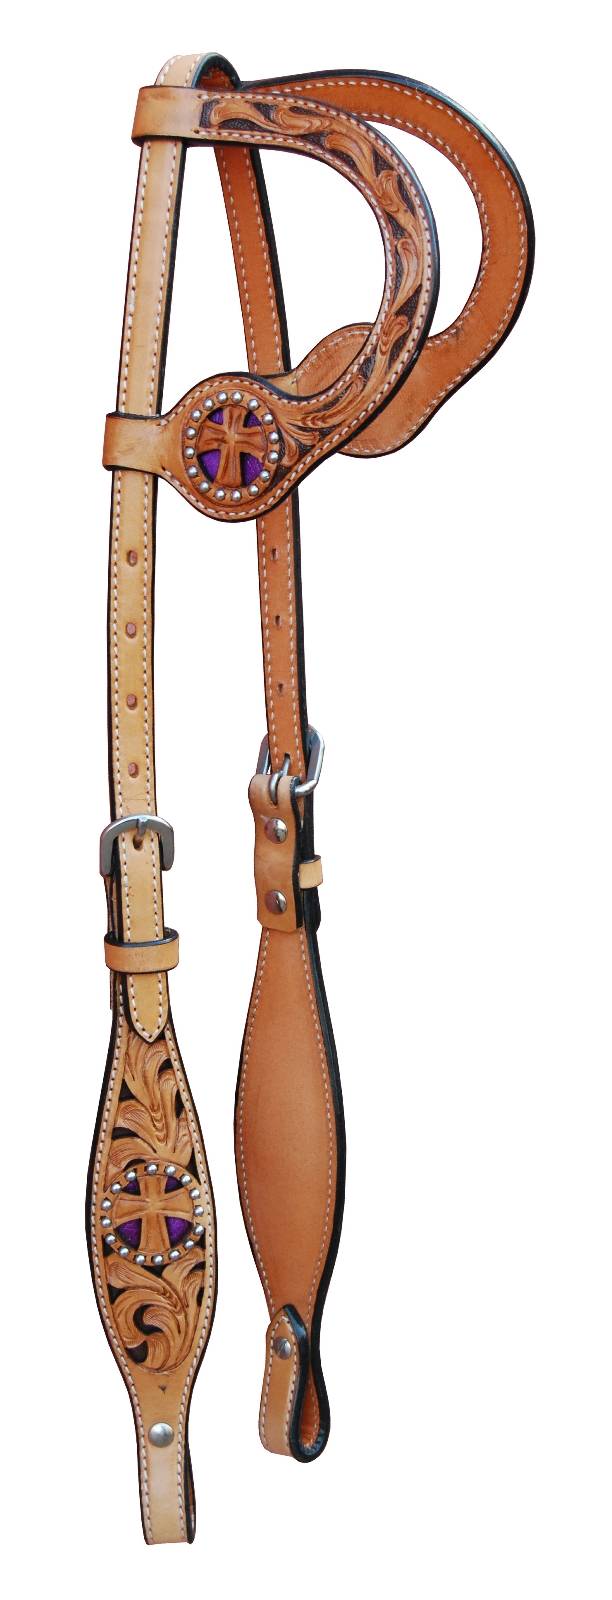 468923PUR HRSE Turn-Two Double Ear Headstall - St. Christopher sku 468923PUR HRSE